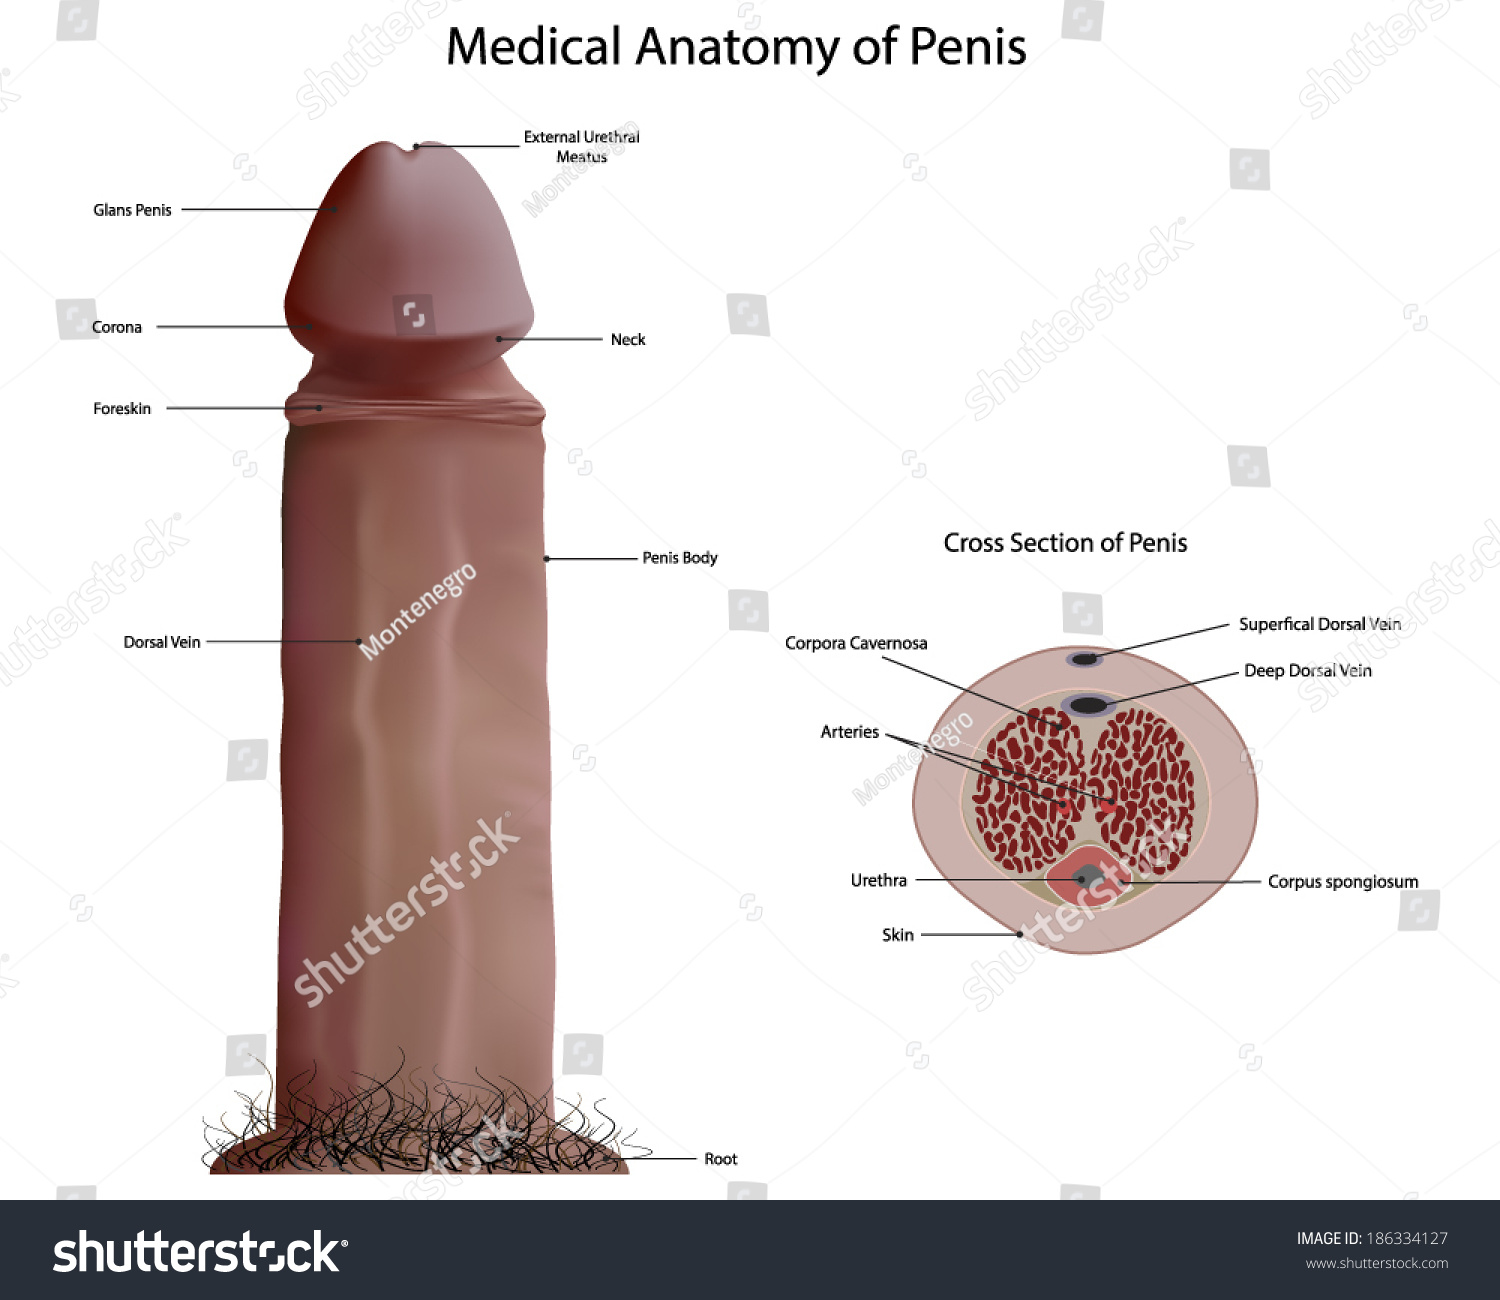 How To Make A Penis With Symbols 85